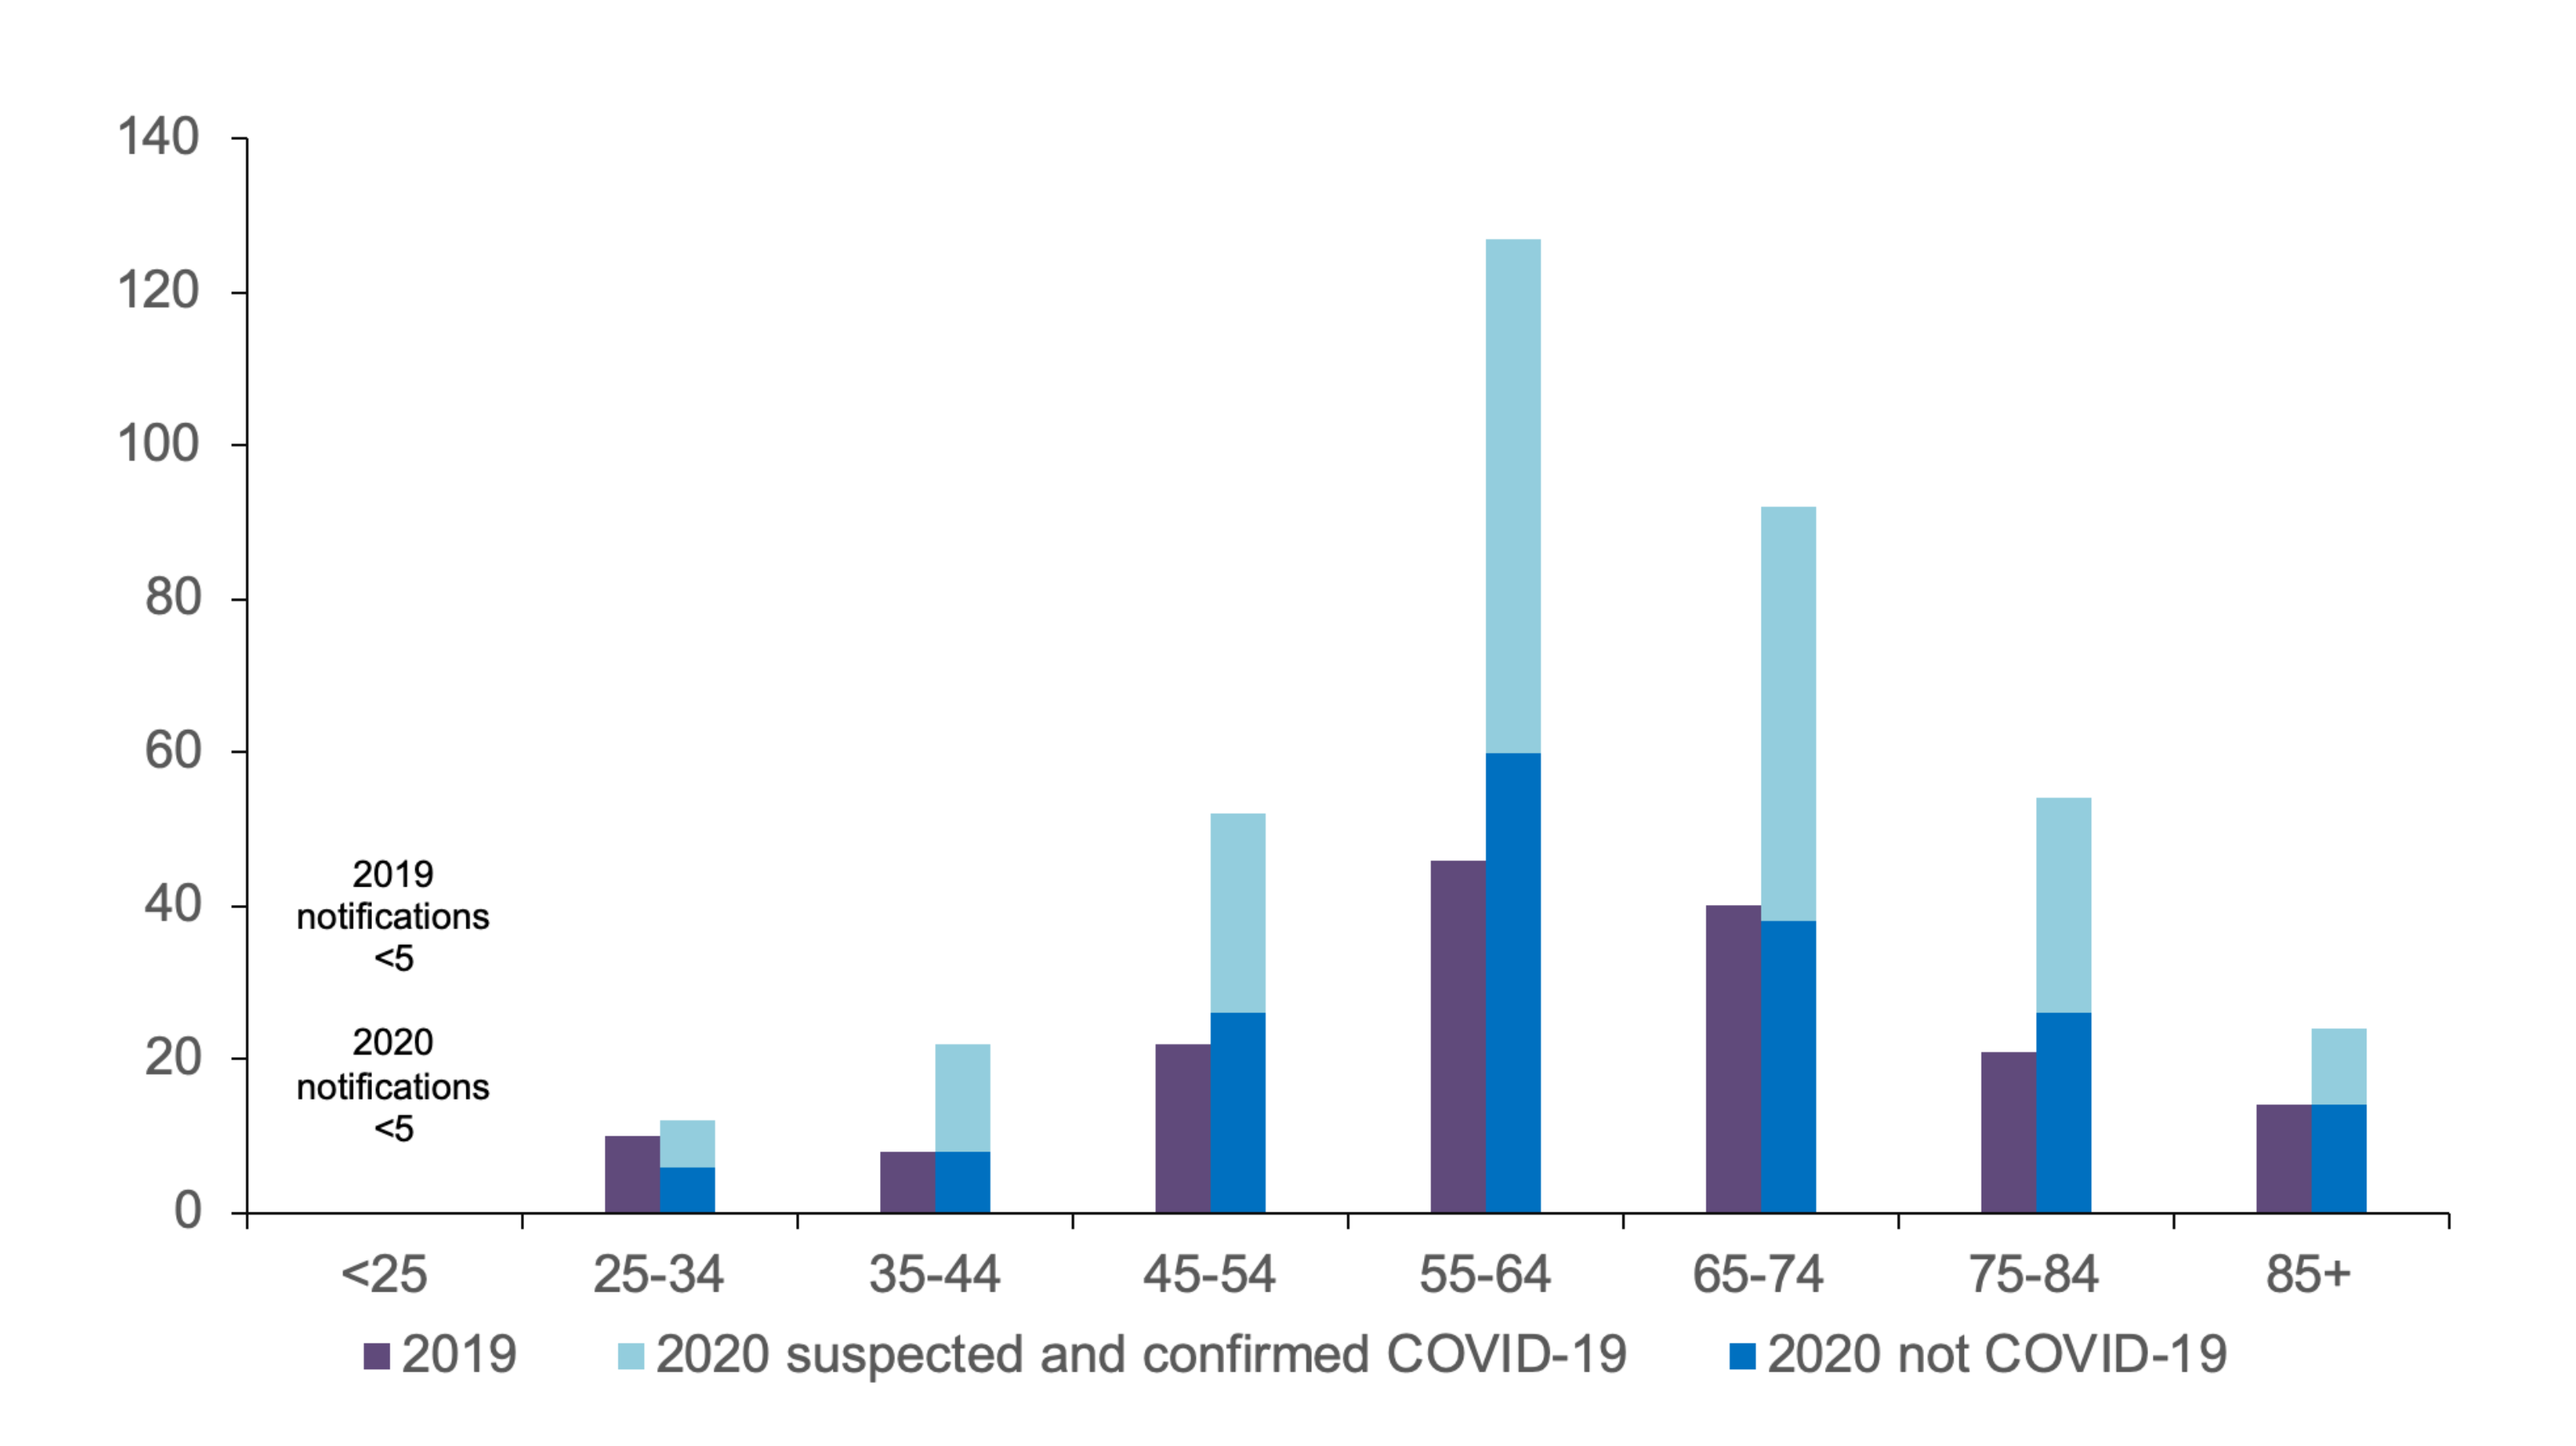 chart showing the number of deaths of people with a learning disability, comparing deaths in 2019 with deaths in 2020, dividing the 2020 deaths between those not related to COVID-19 and suspected and confirmed COVID-19 cases